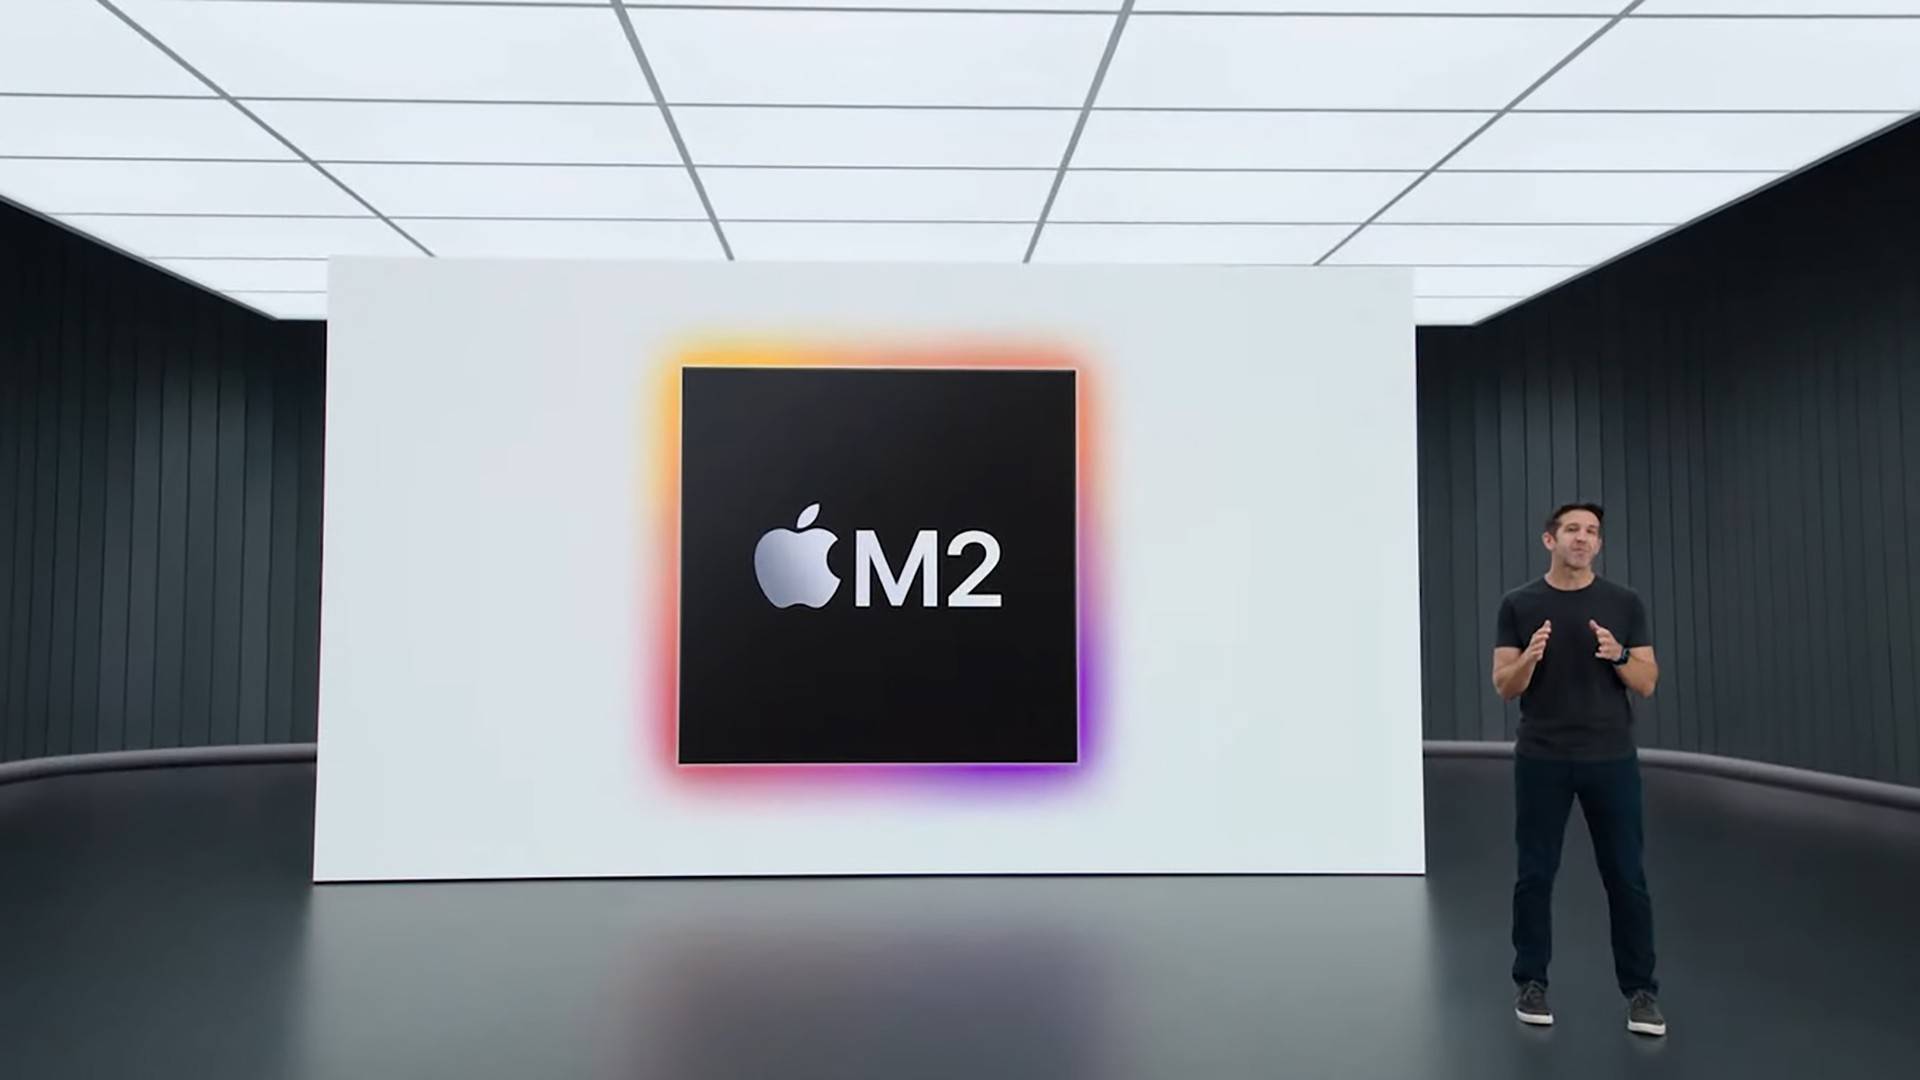 Apple executive announcing M2 chip